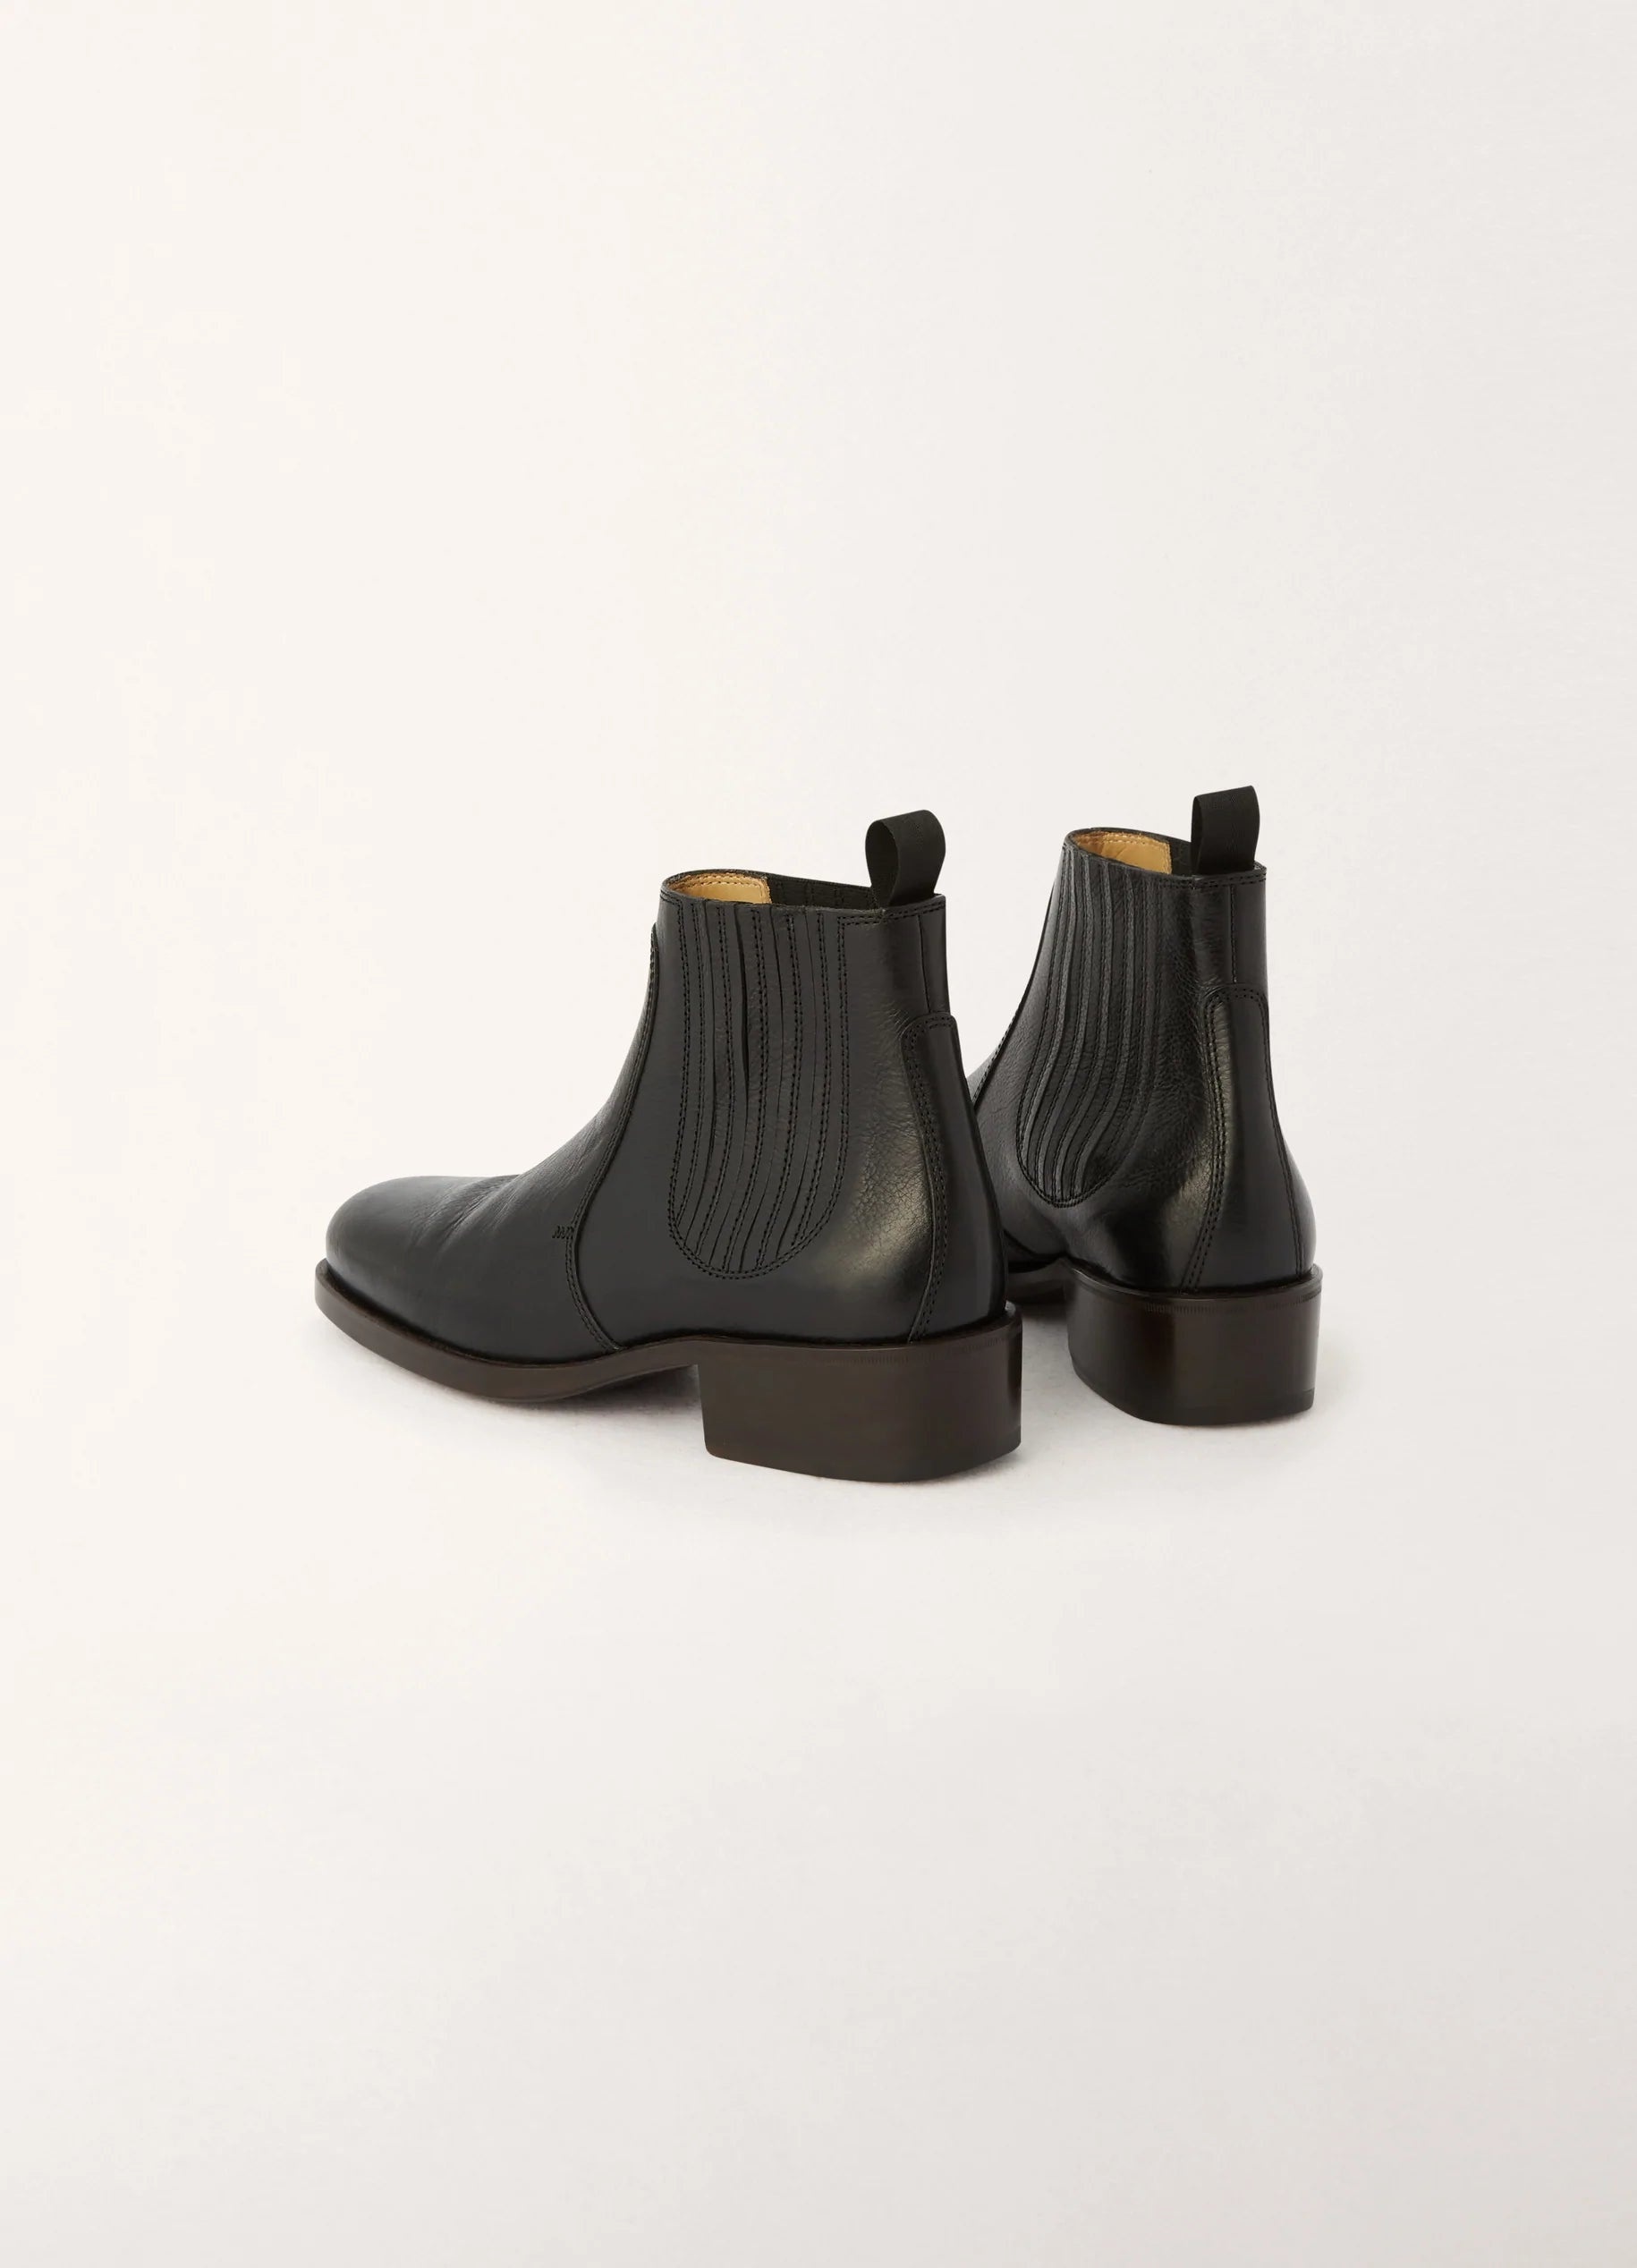 CHELSEA BOOTS
SOFT VEGETABLE - 4